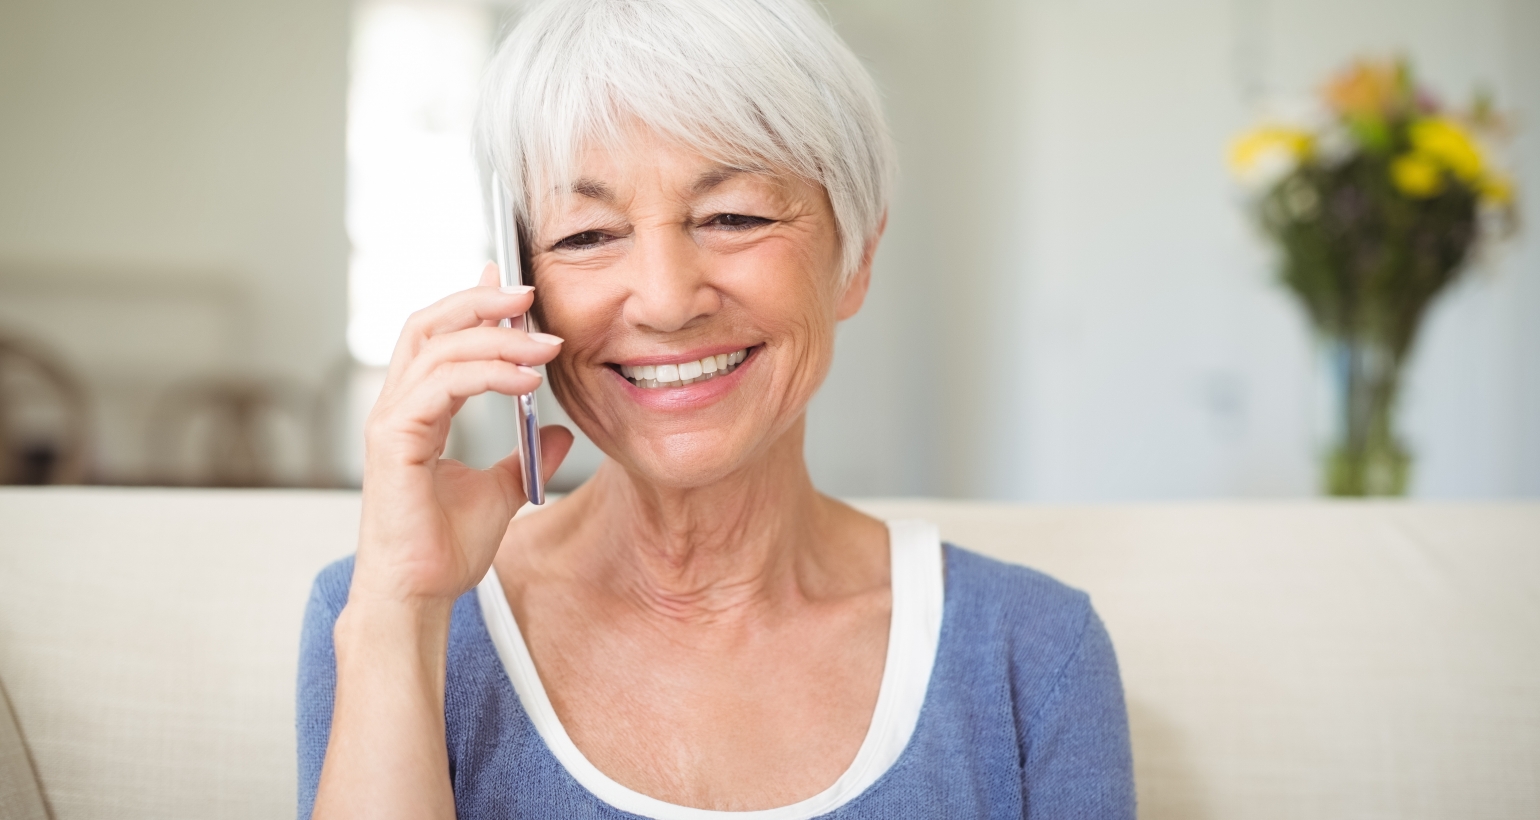 Grandma smiling while talking over the phone